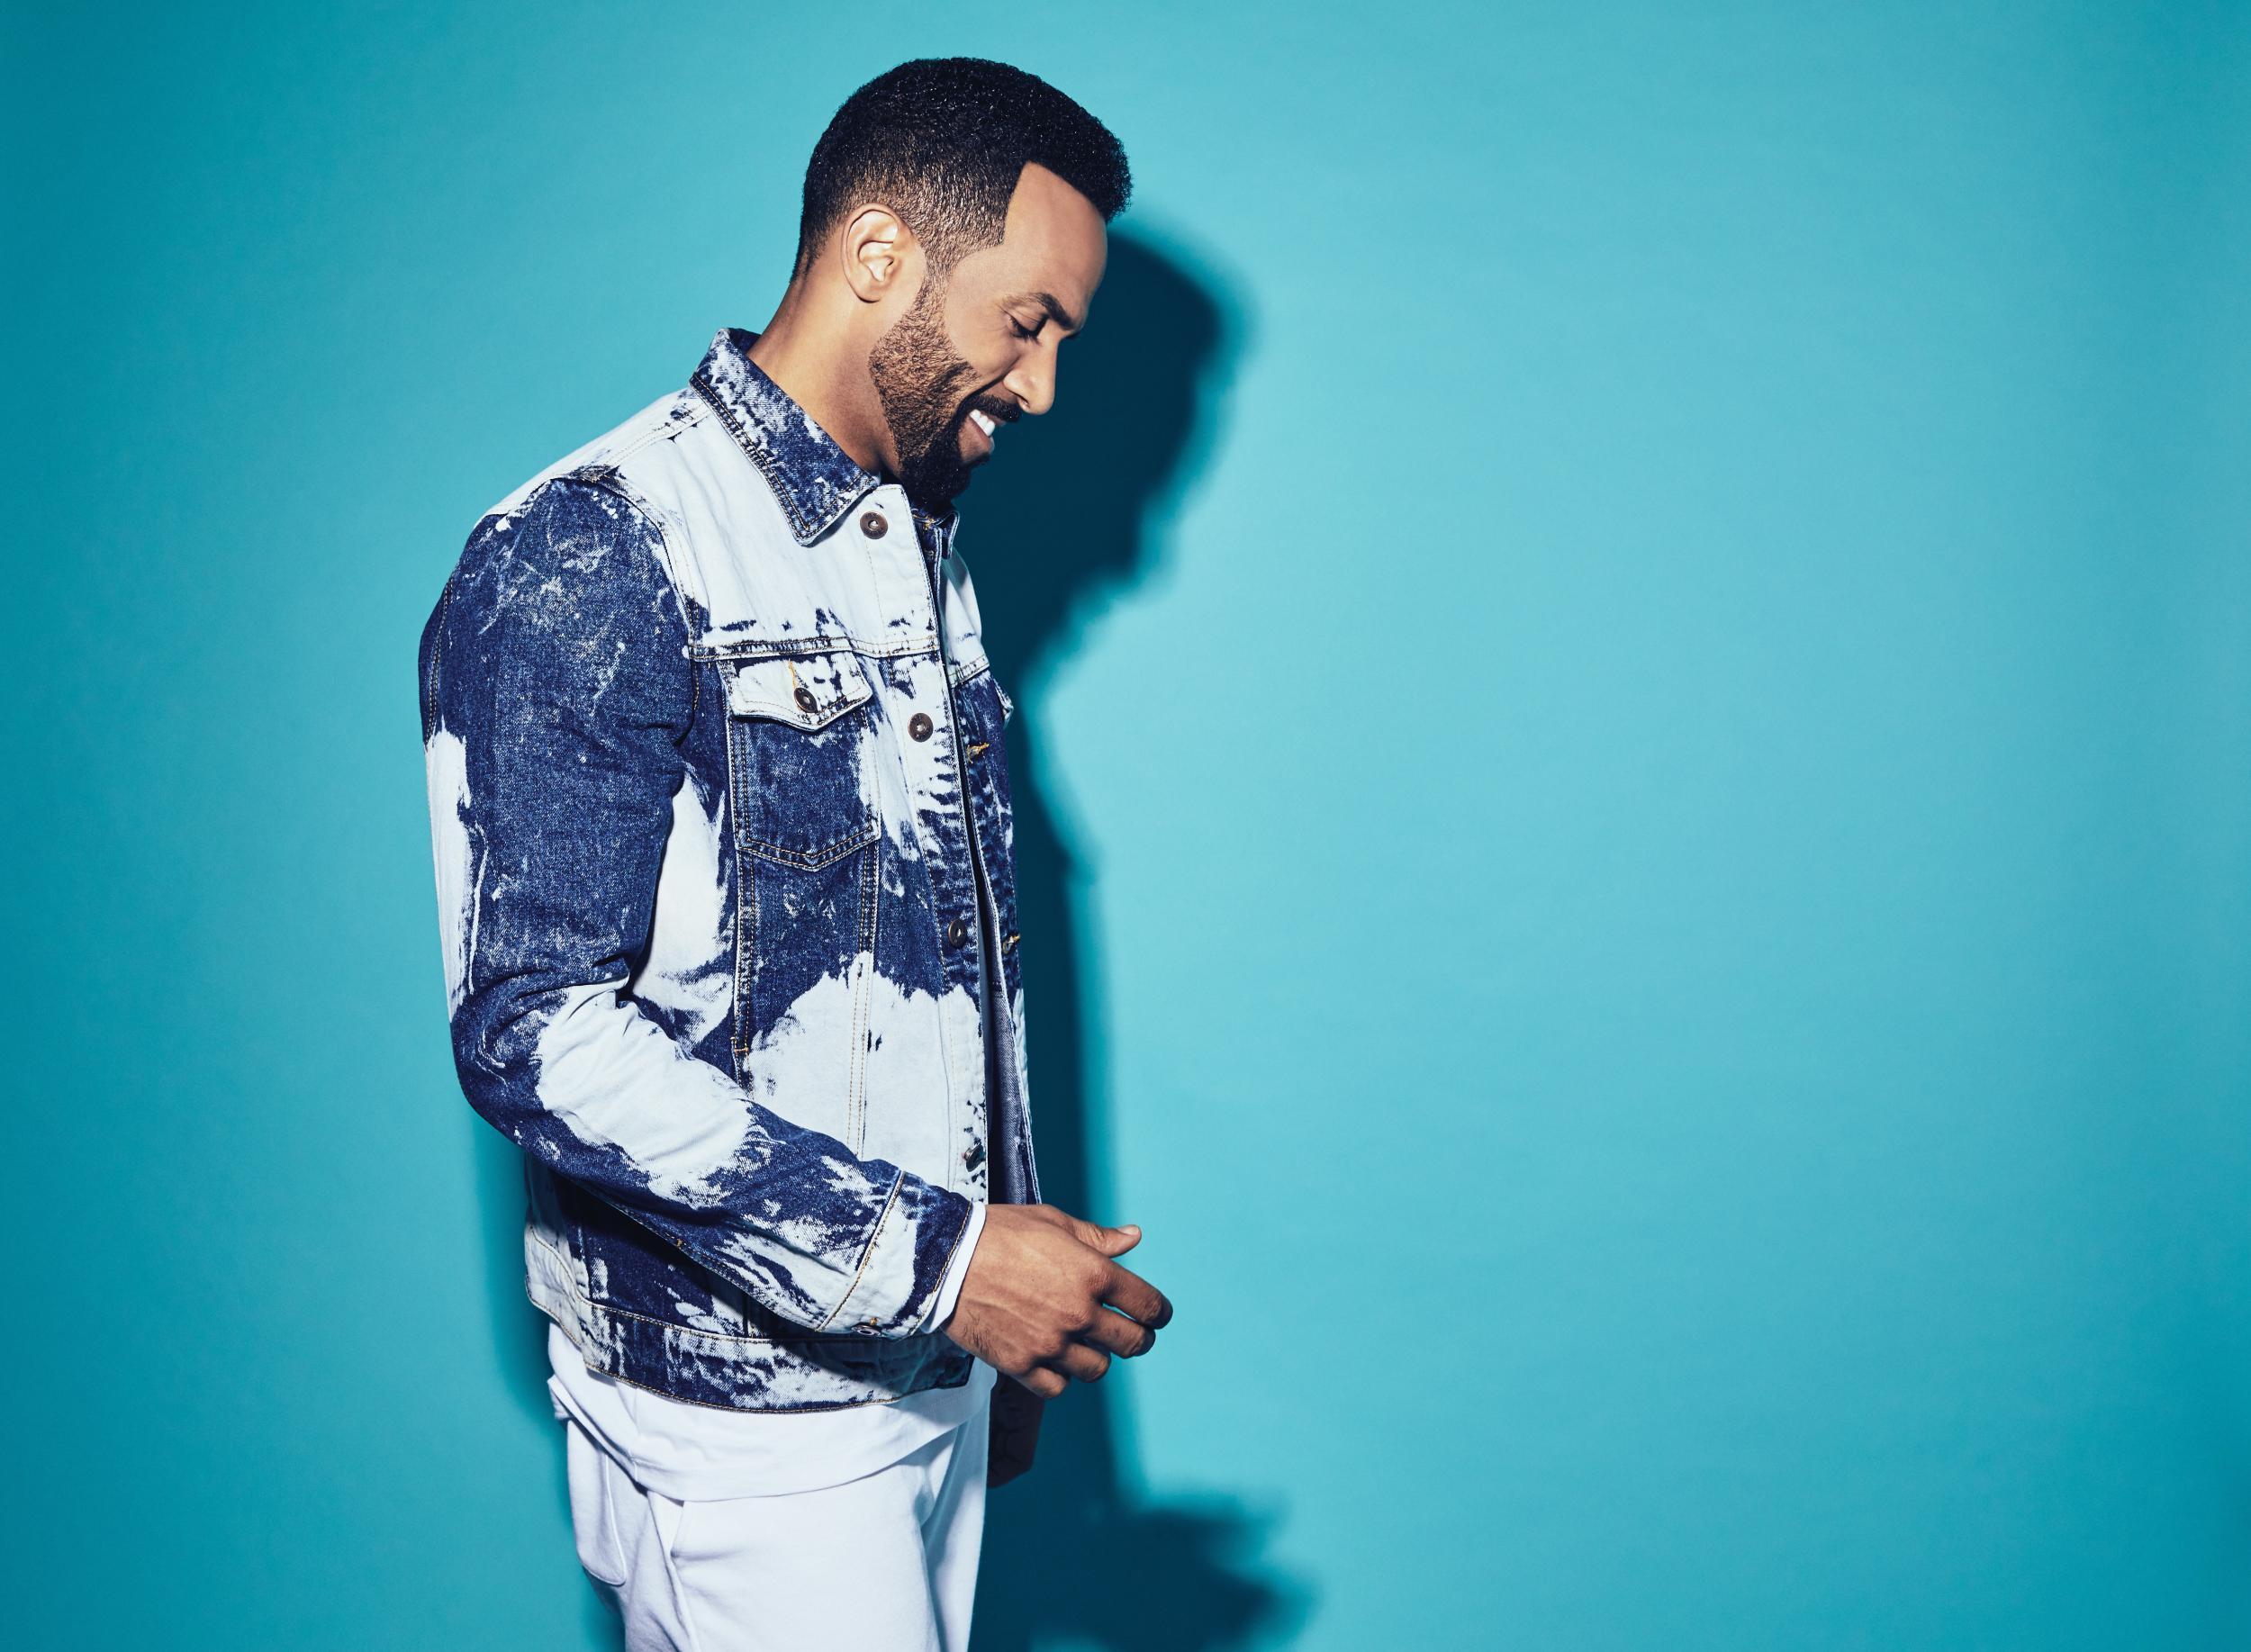 Craig David 'I hit the ground running and didn't stop' The Independent